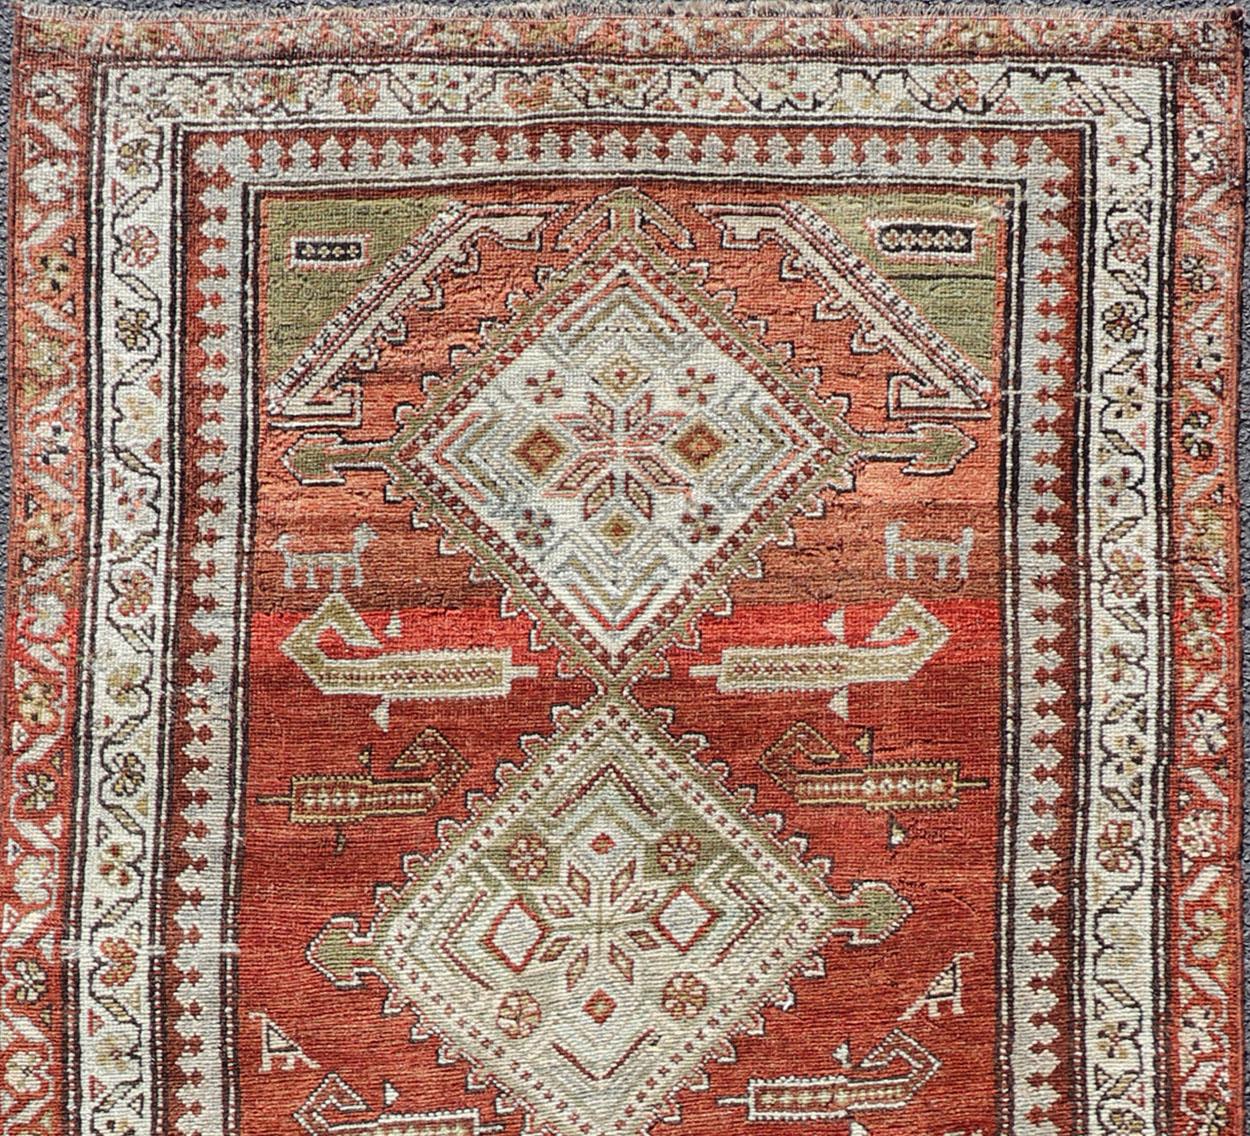 All-over Medallion antique Persian Kurdish runner in soft red-rust, rug R20-0705, country of origin / type: Iran / Kurdish, circa 1910

This Kurdish tribal rug was woven by Kurdish weavers in western Persia. Often they used this repeating flower